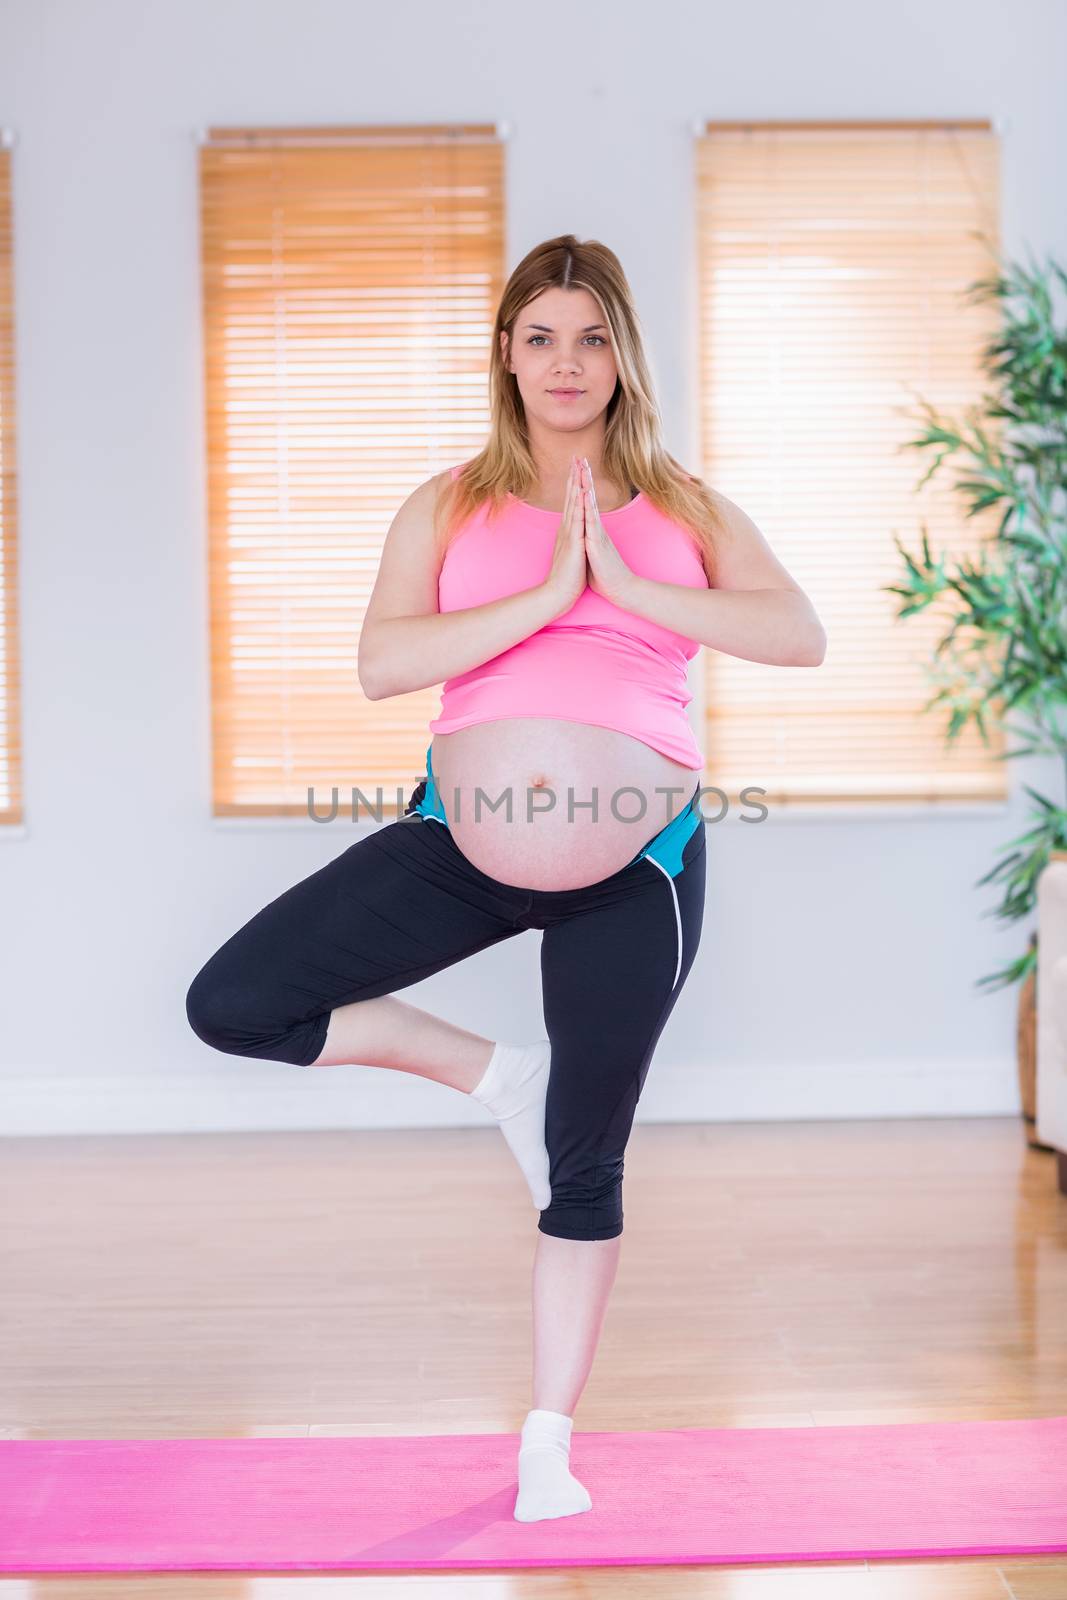 Pregnant woman doing yoga on exercise mat at home